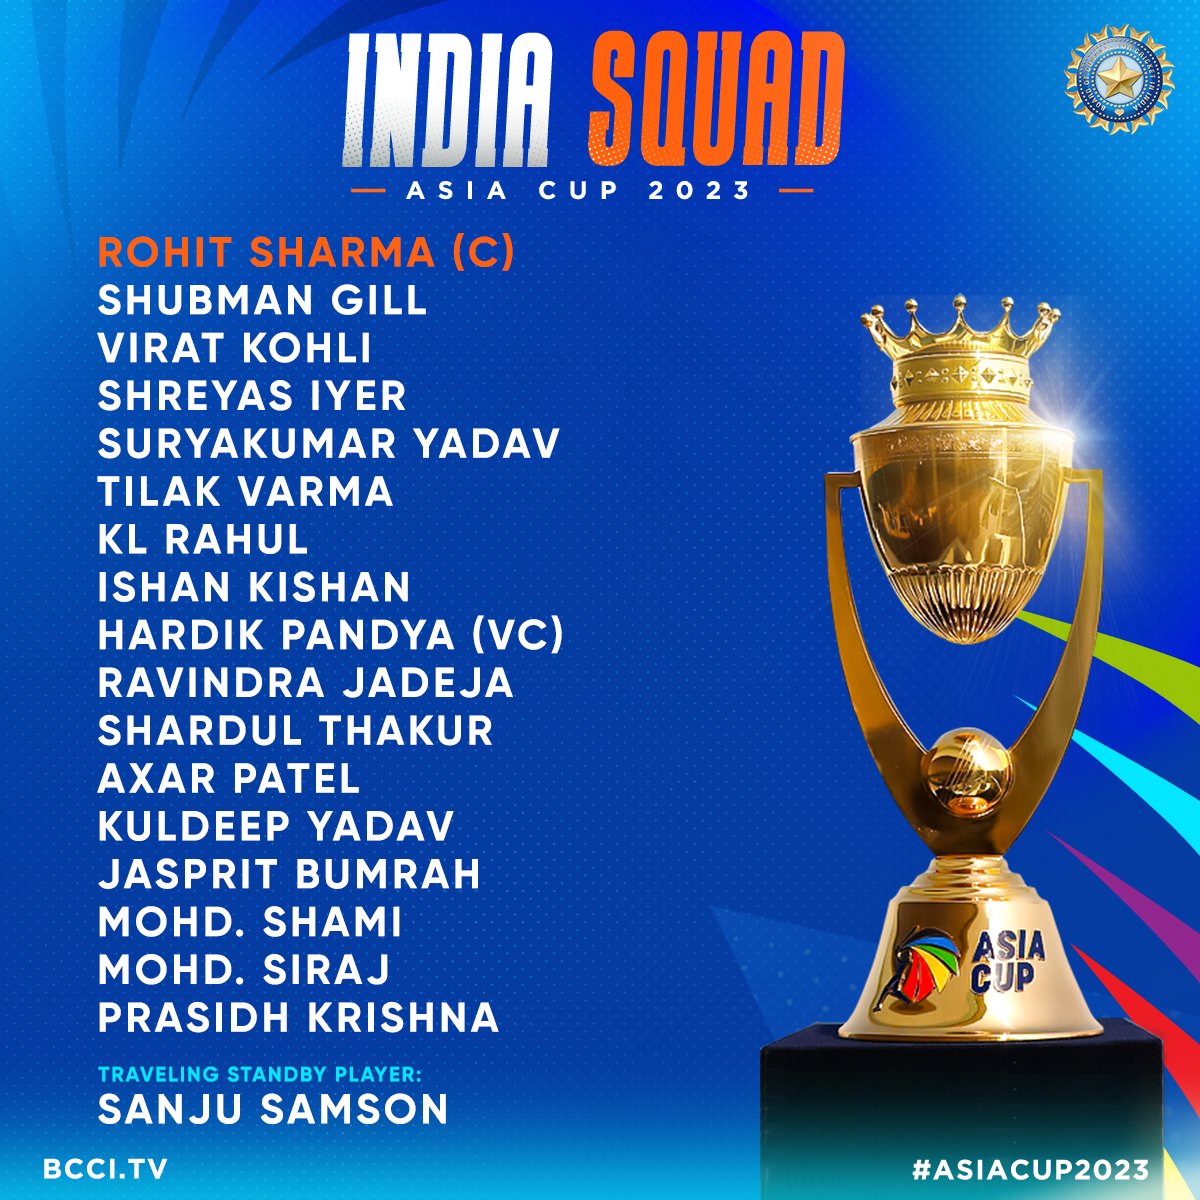 India’s squad for Asia Cup 2023